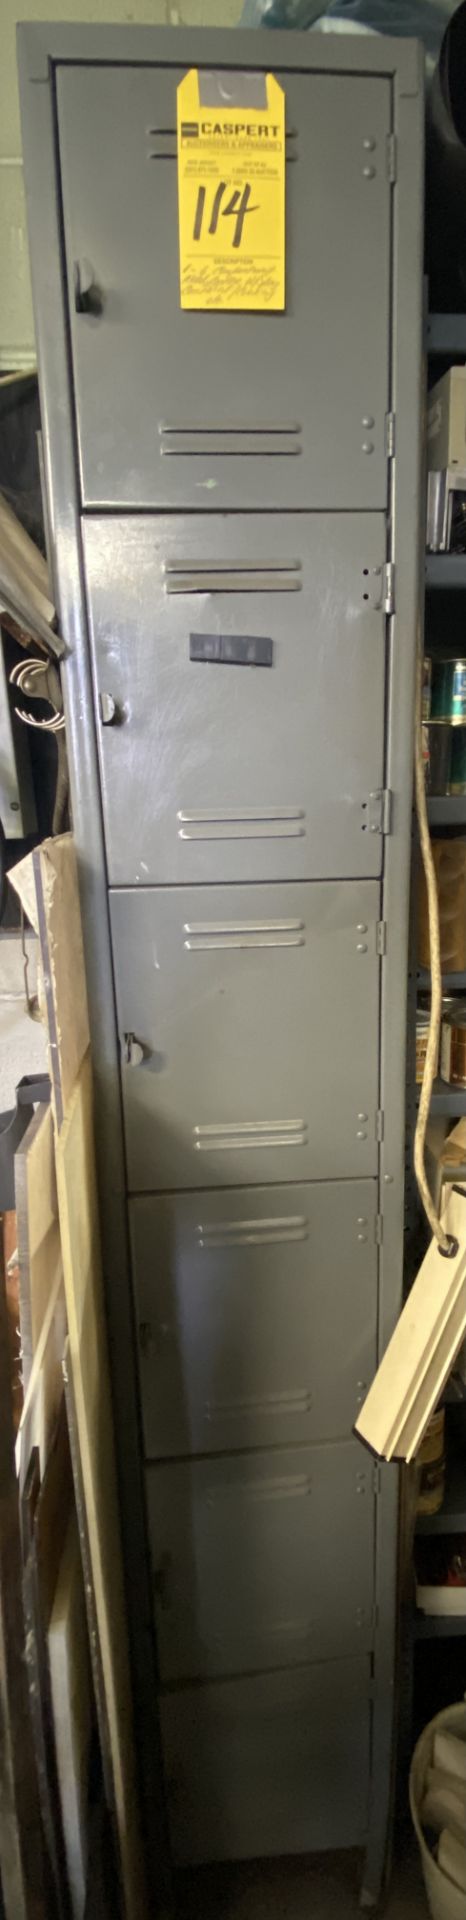 6 Compartment Locker with Contents